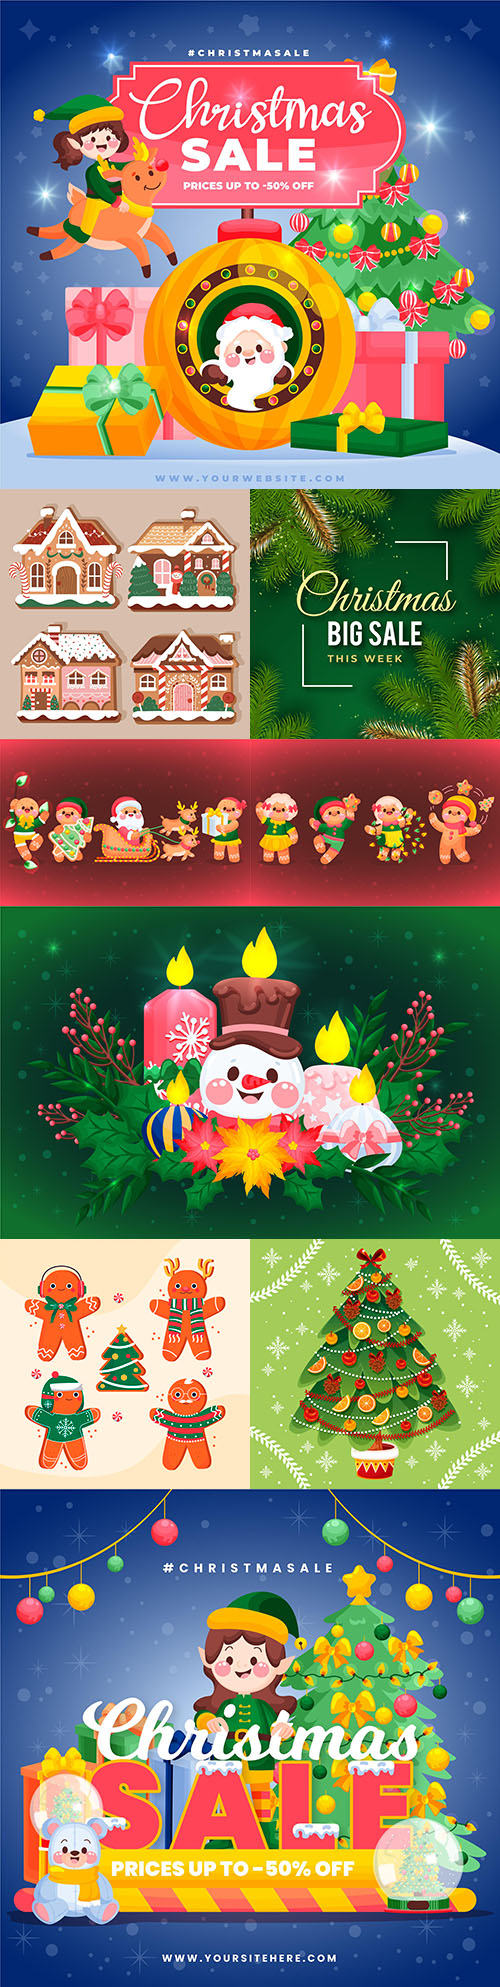 Christmas sales and New Year design elements illustration
